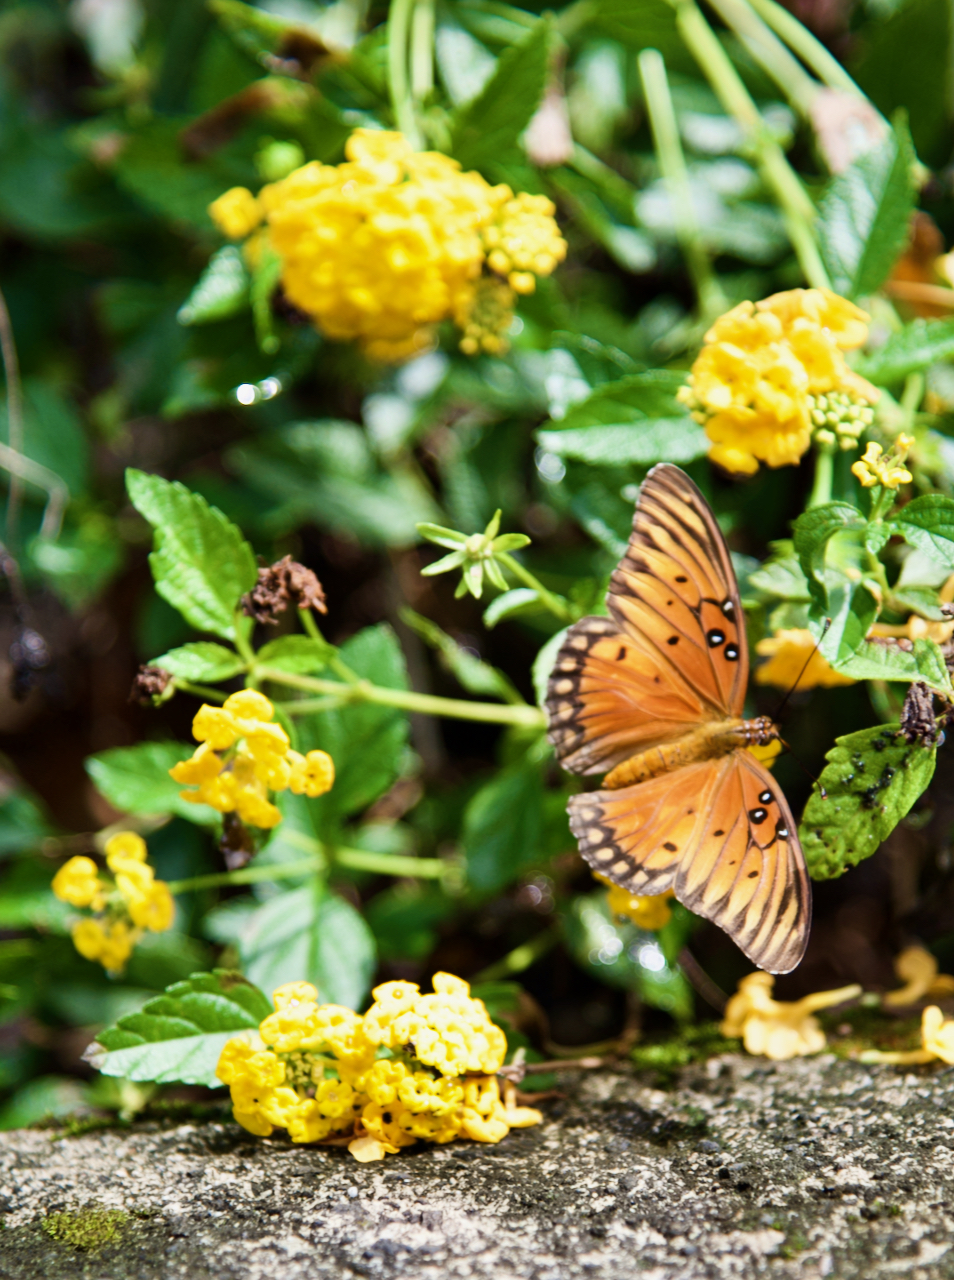 A butterfly among yellow flowers.